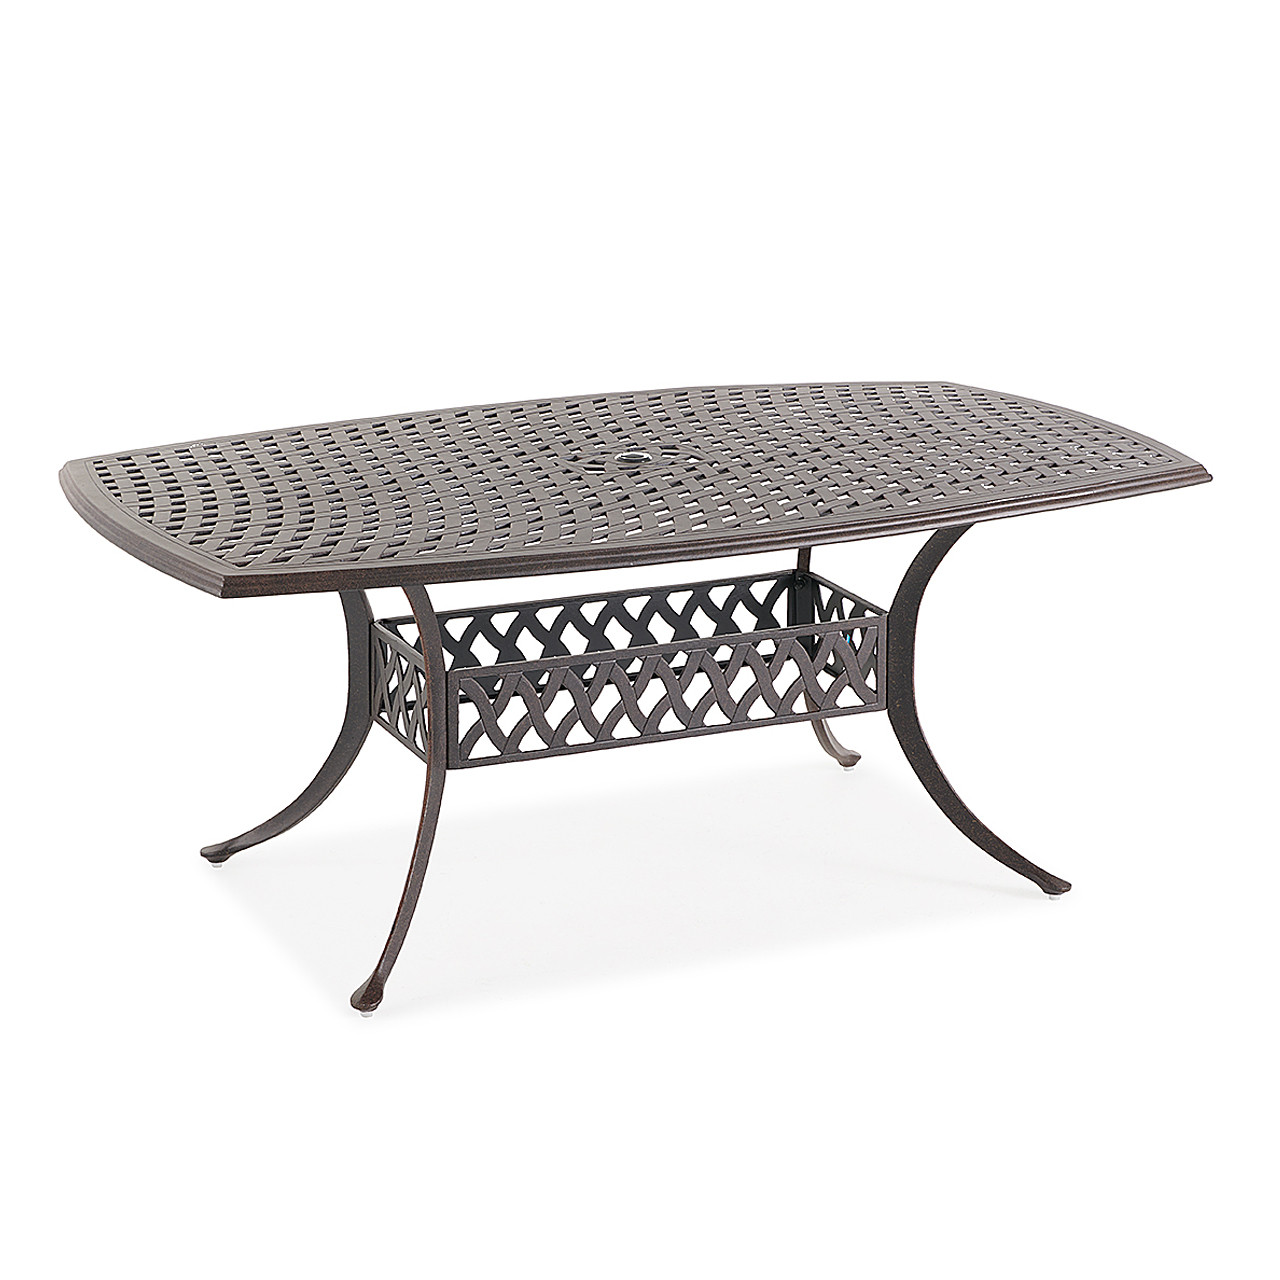 Carlisle Aged Bronze Cast Aluminum 72 x 42 in. Boat-Shaped Dining Table